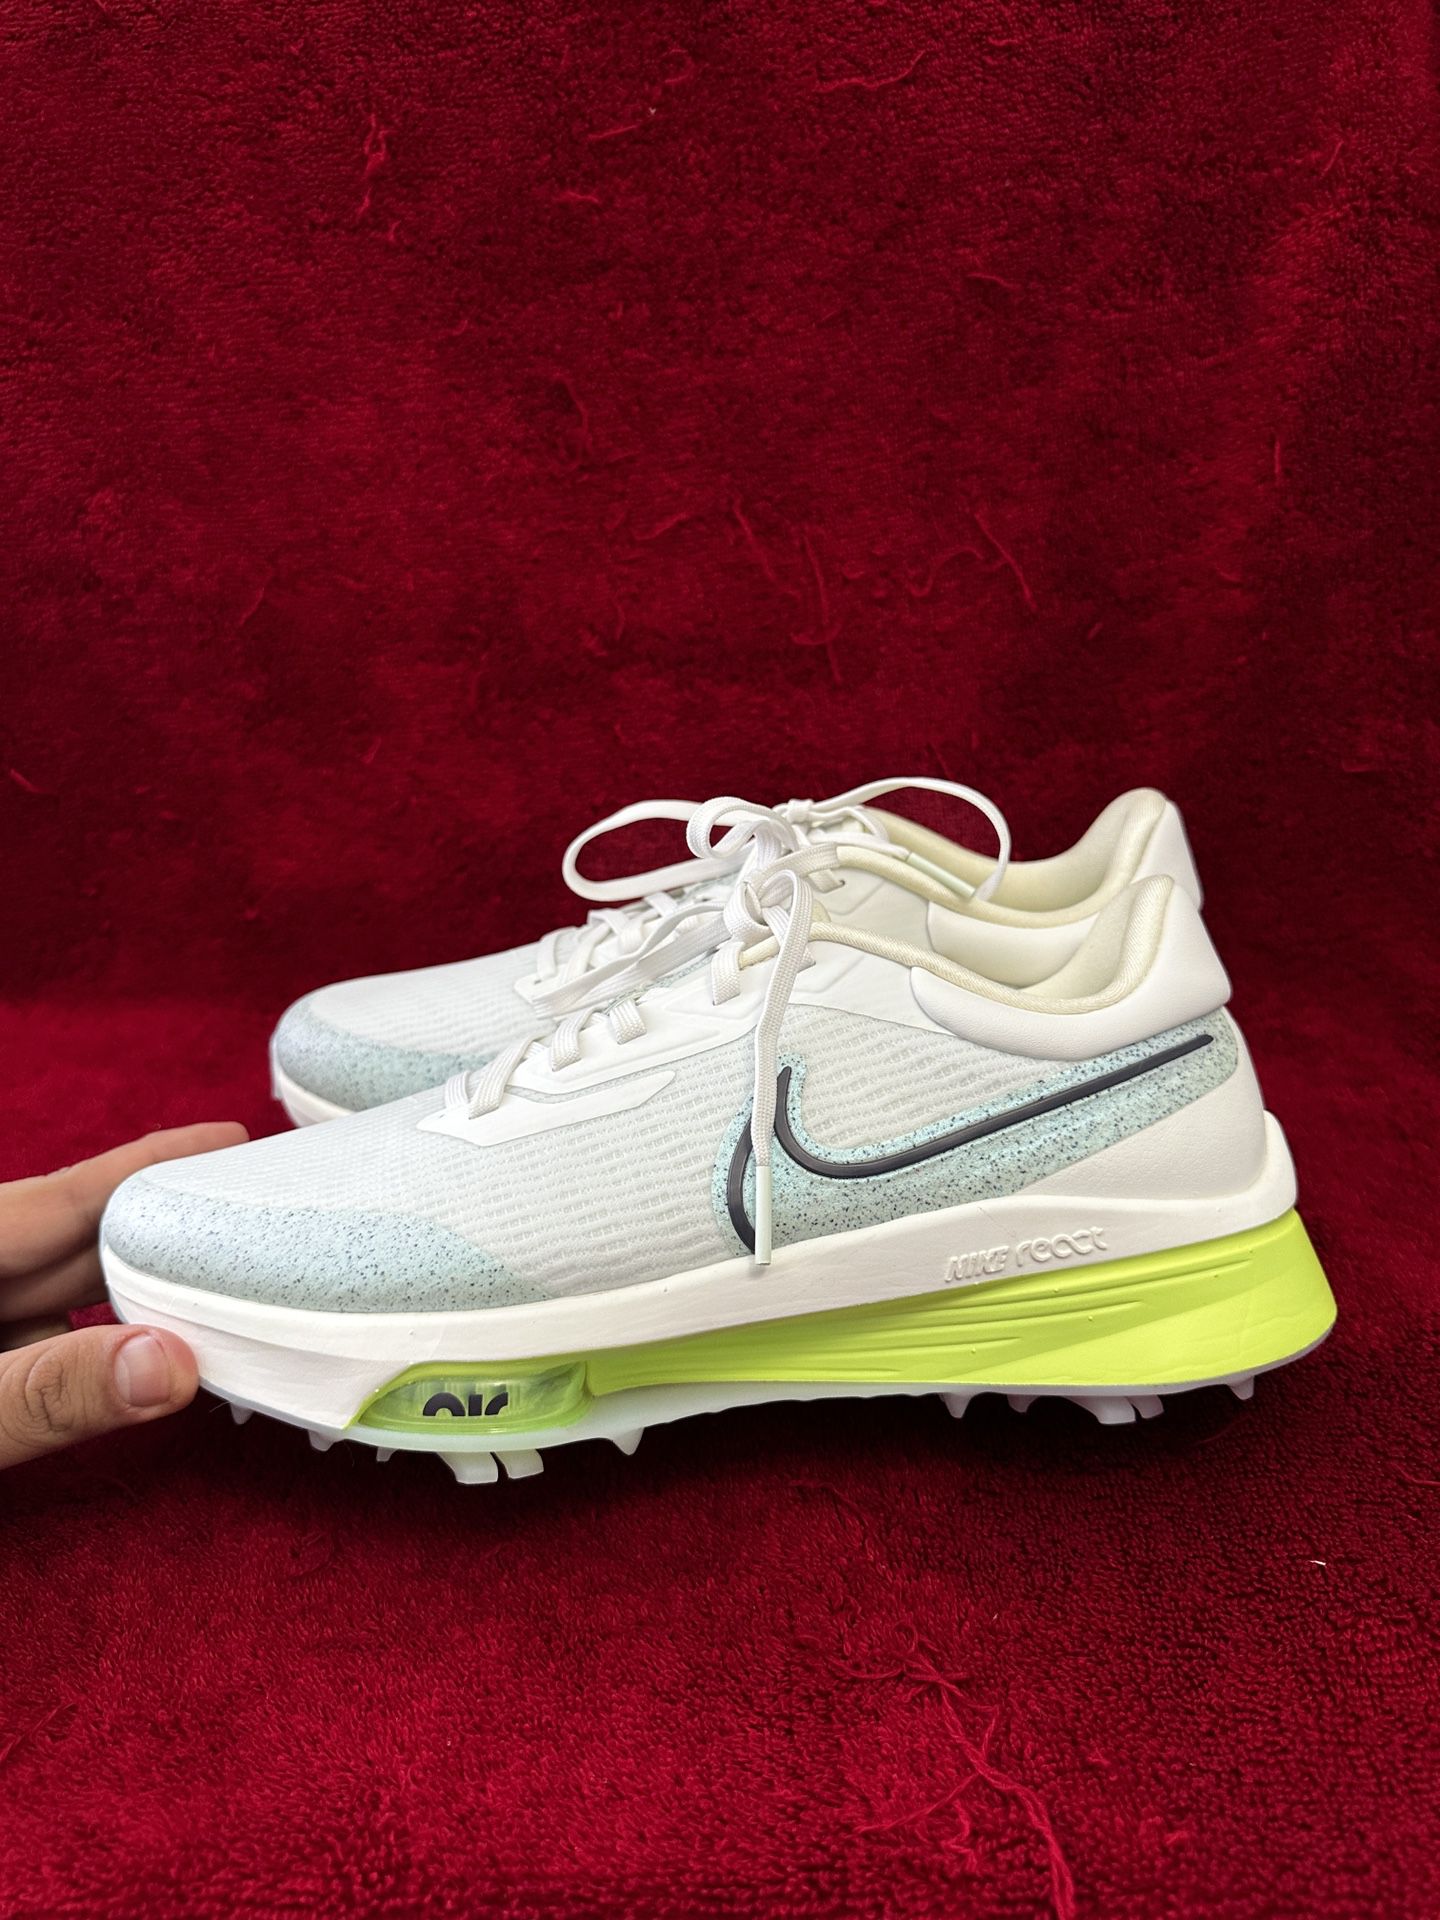 Nike Air Zoom Infinity Tour Next% Golf Shoes Sail Green DC5221-131 Size Mens  8 for Sale in San Diego, CA - OfferUp